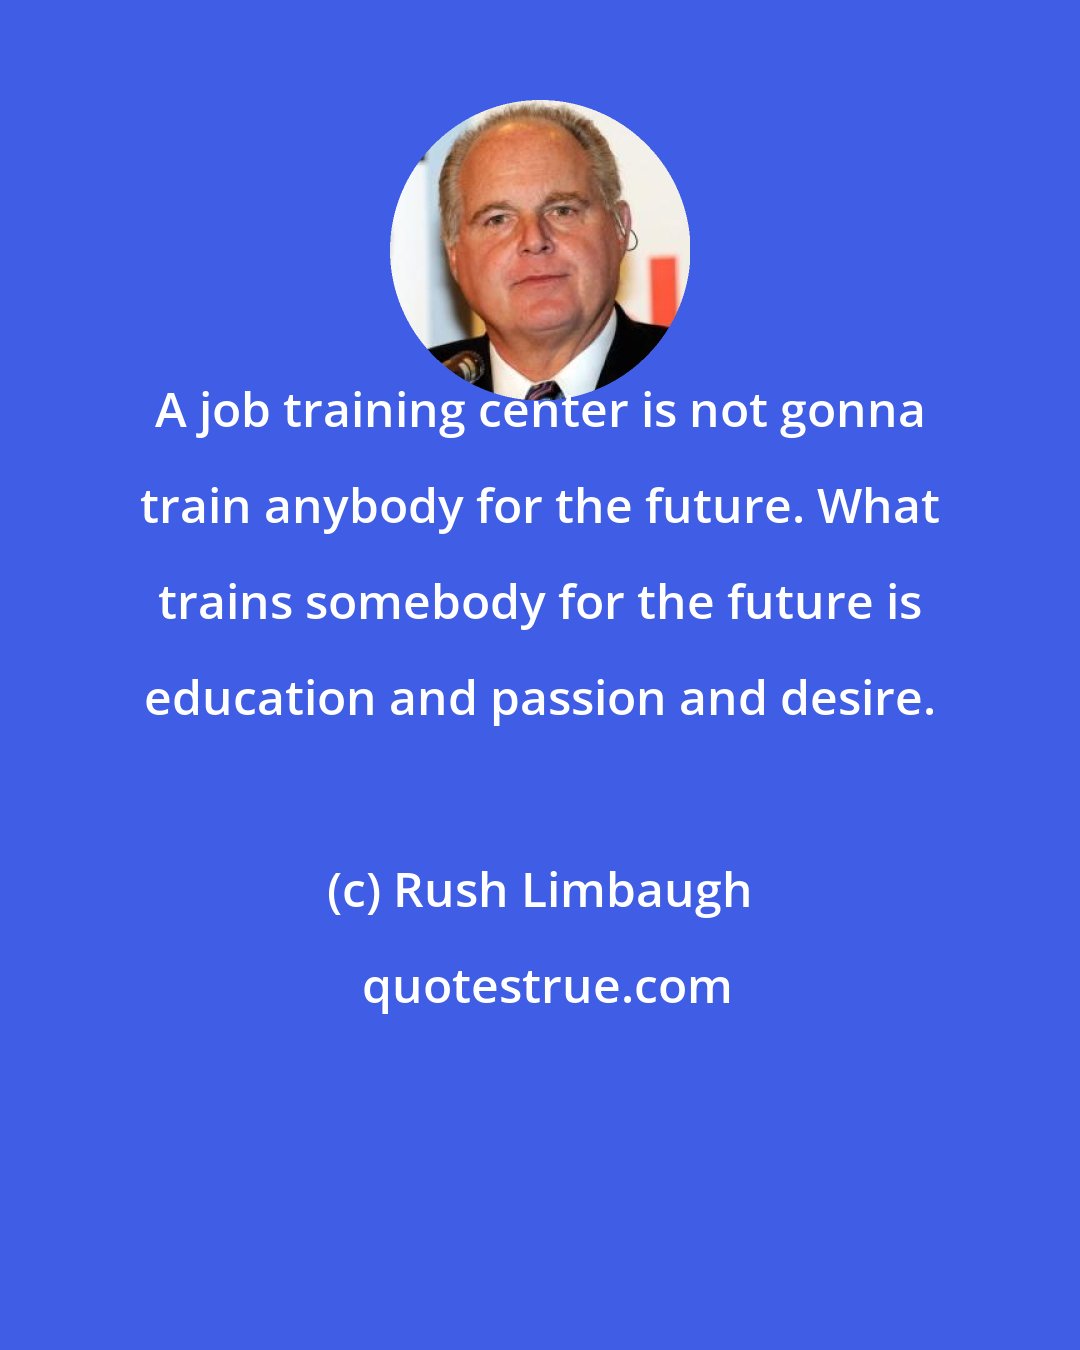 Rush Limbaugh: A job training center is not gonna train anybody for the future. What trains somebody for the future is education and passion and desire.